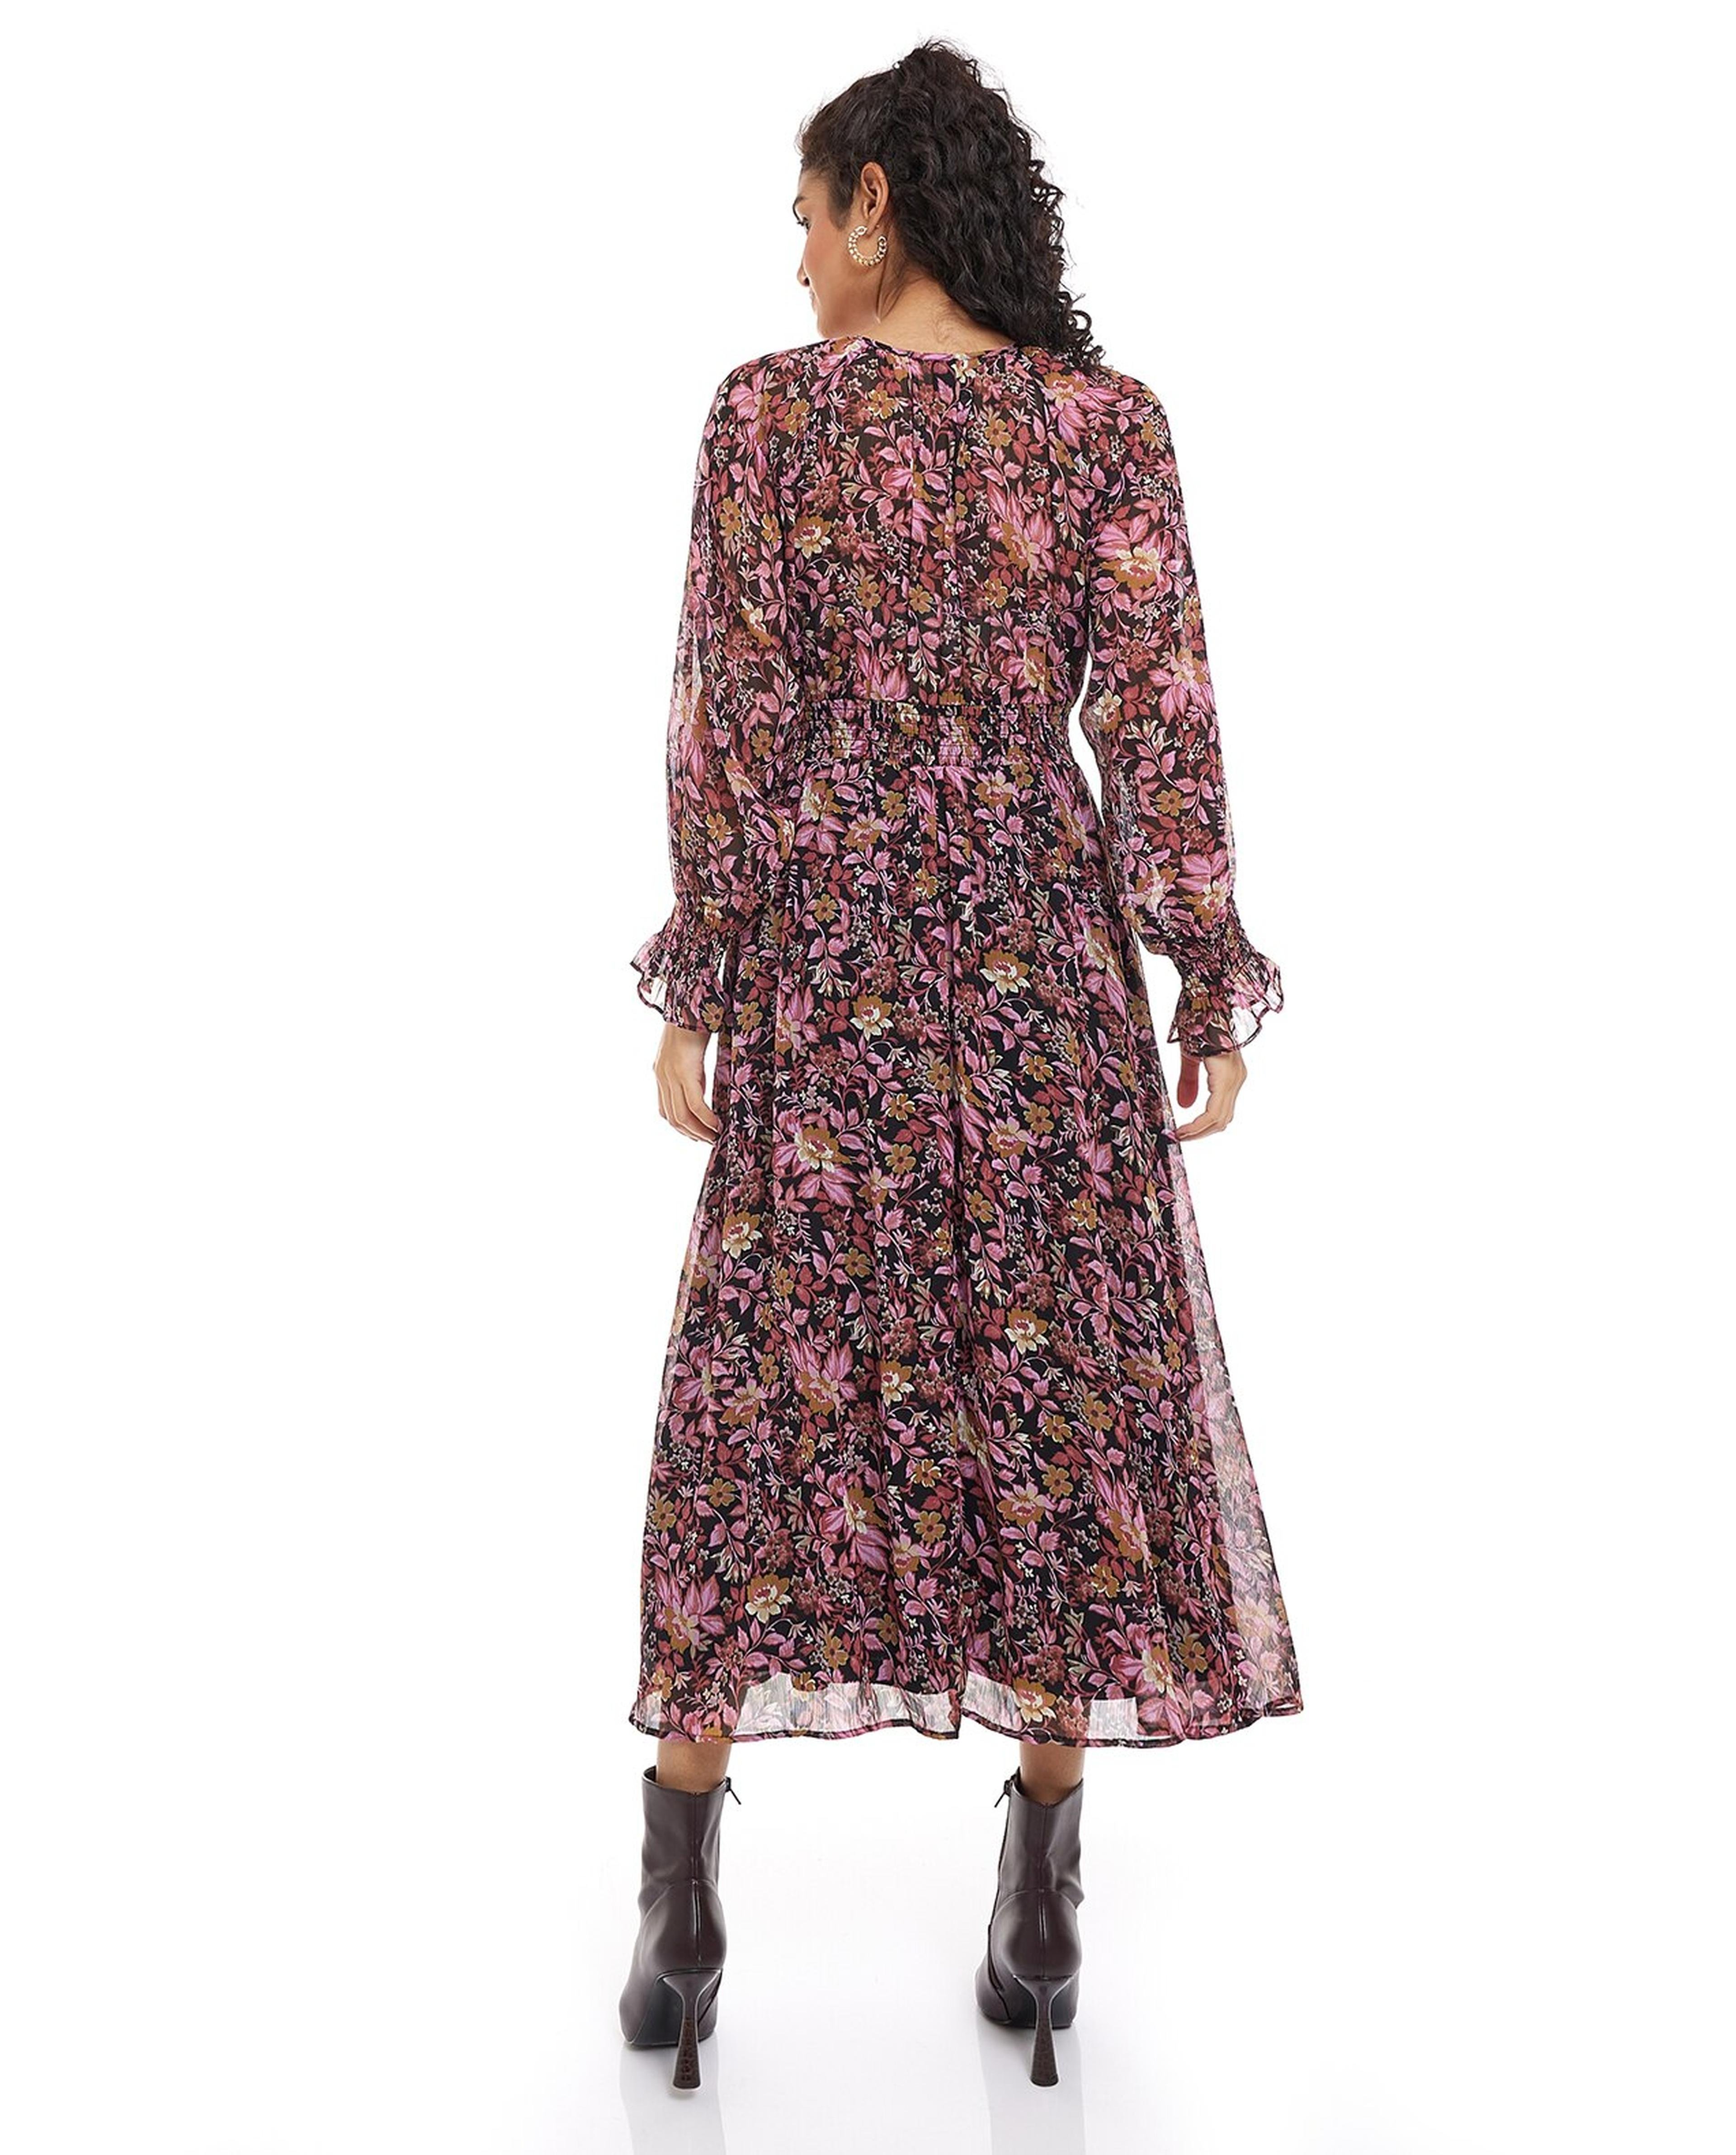 Floral Print Midi Dress with Crew Neck and Long Sleeves